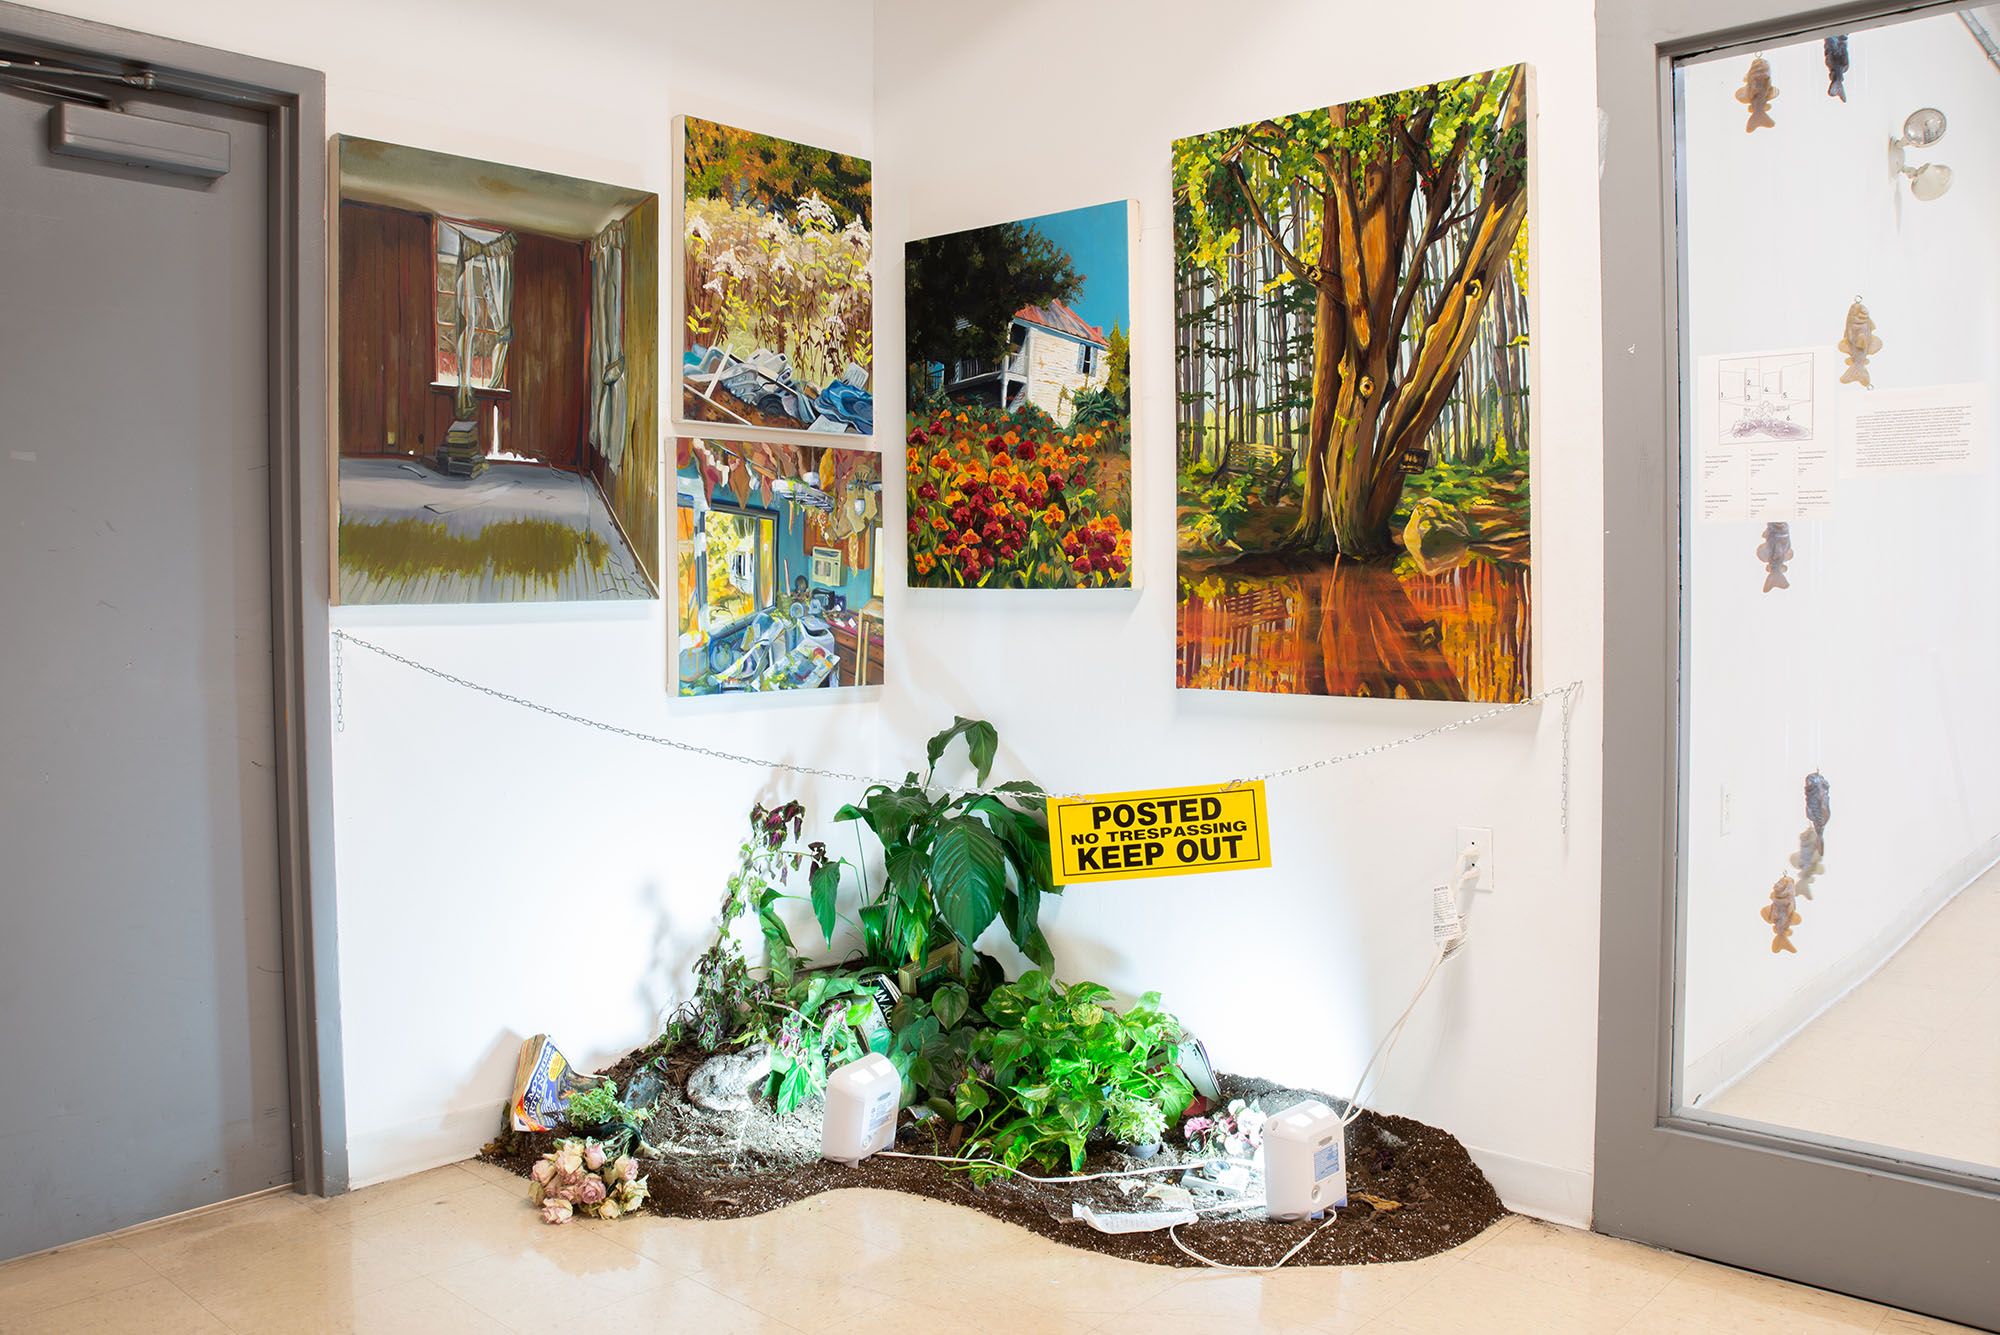 Five paintings depicting scenes of forrest and decay above an installaiton of dirt and plants market by a yellow sign that reads, "Posted no tresspassing keep out".